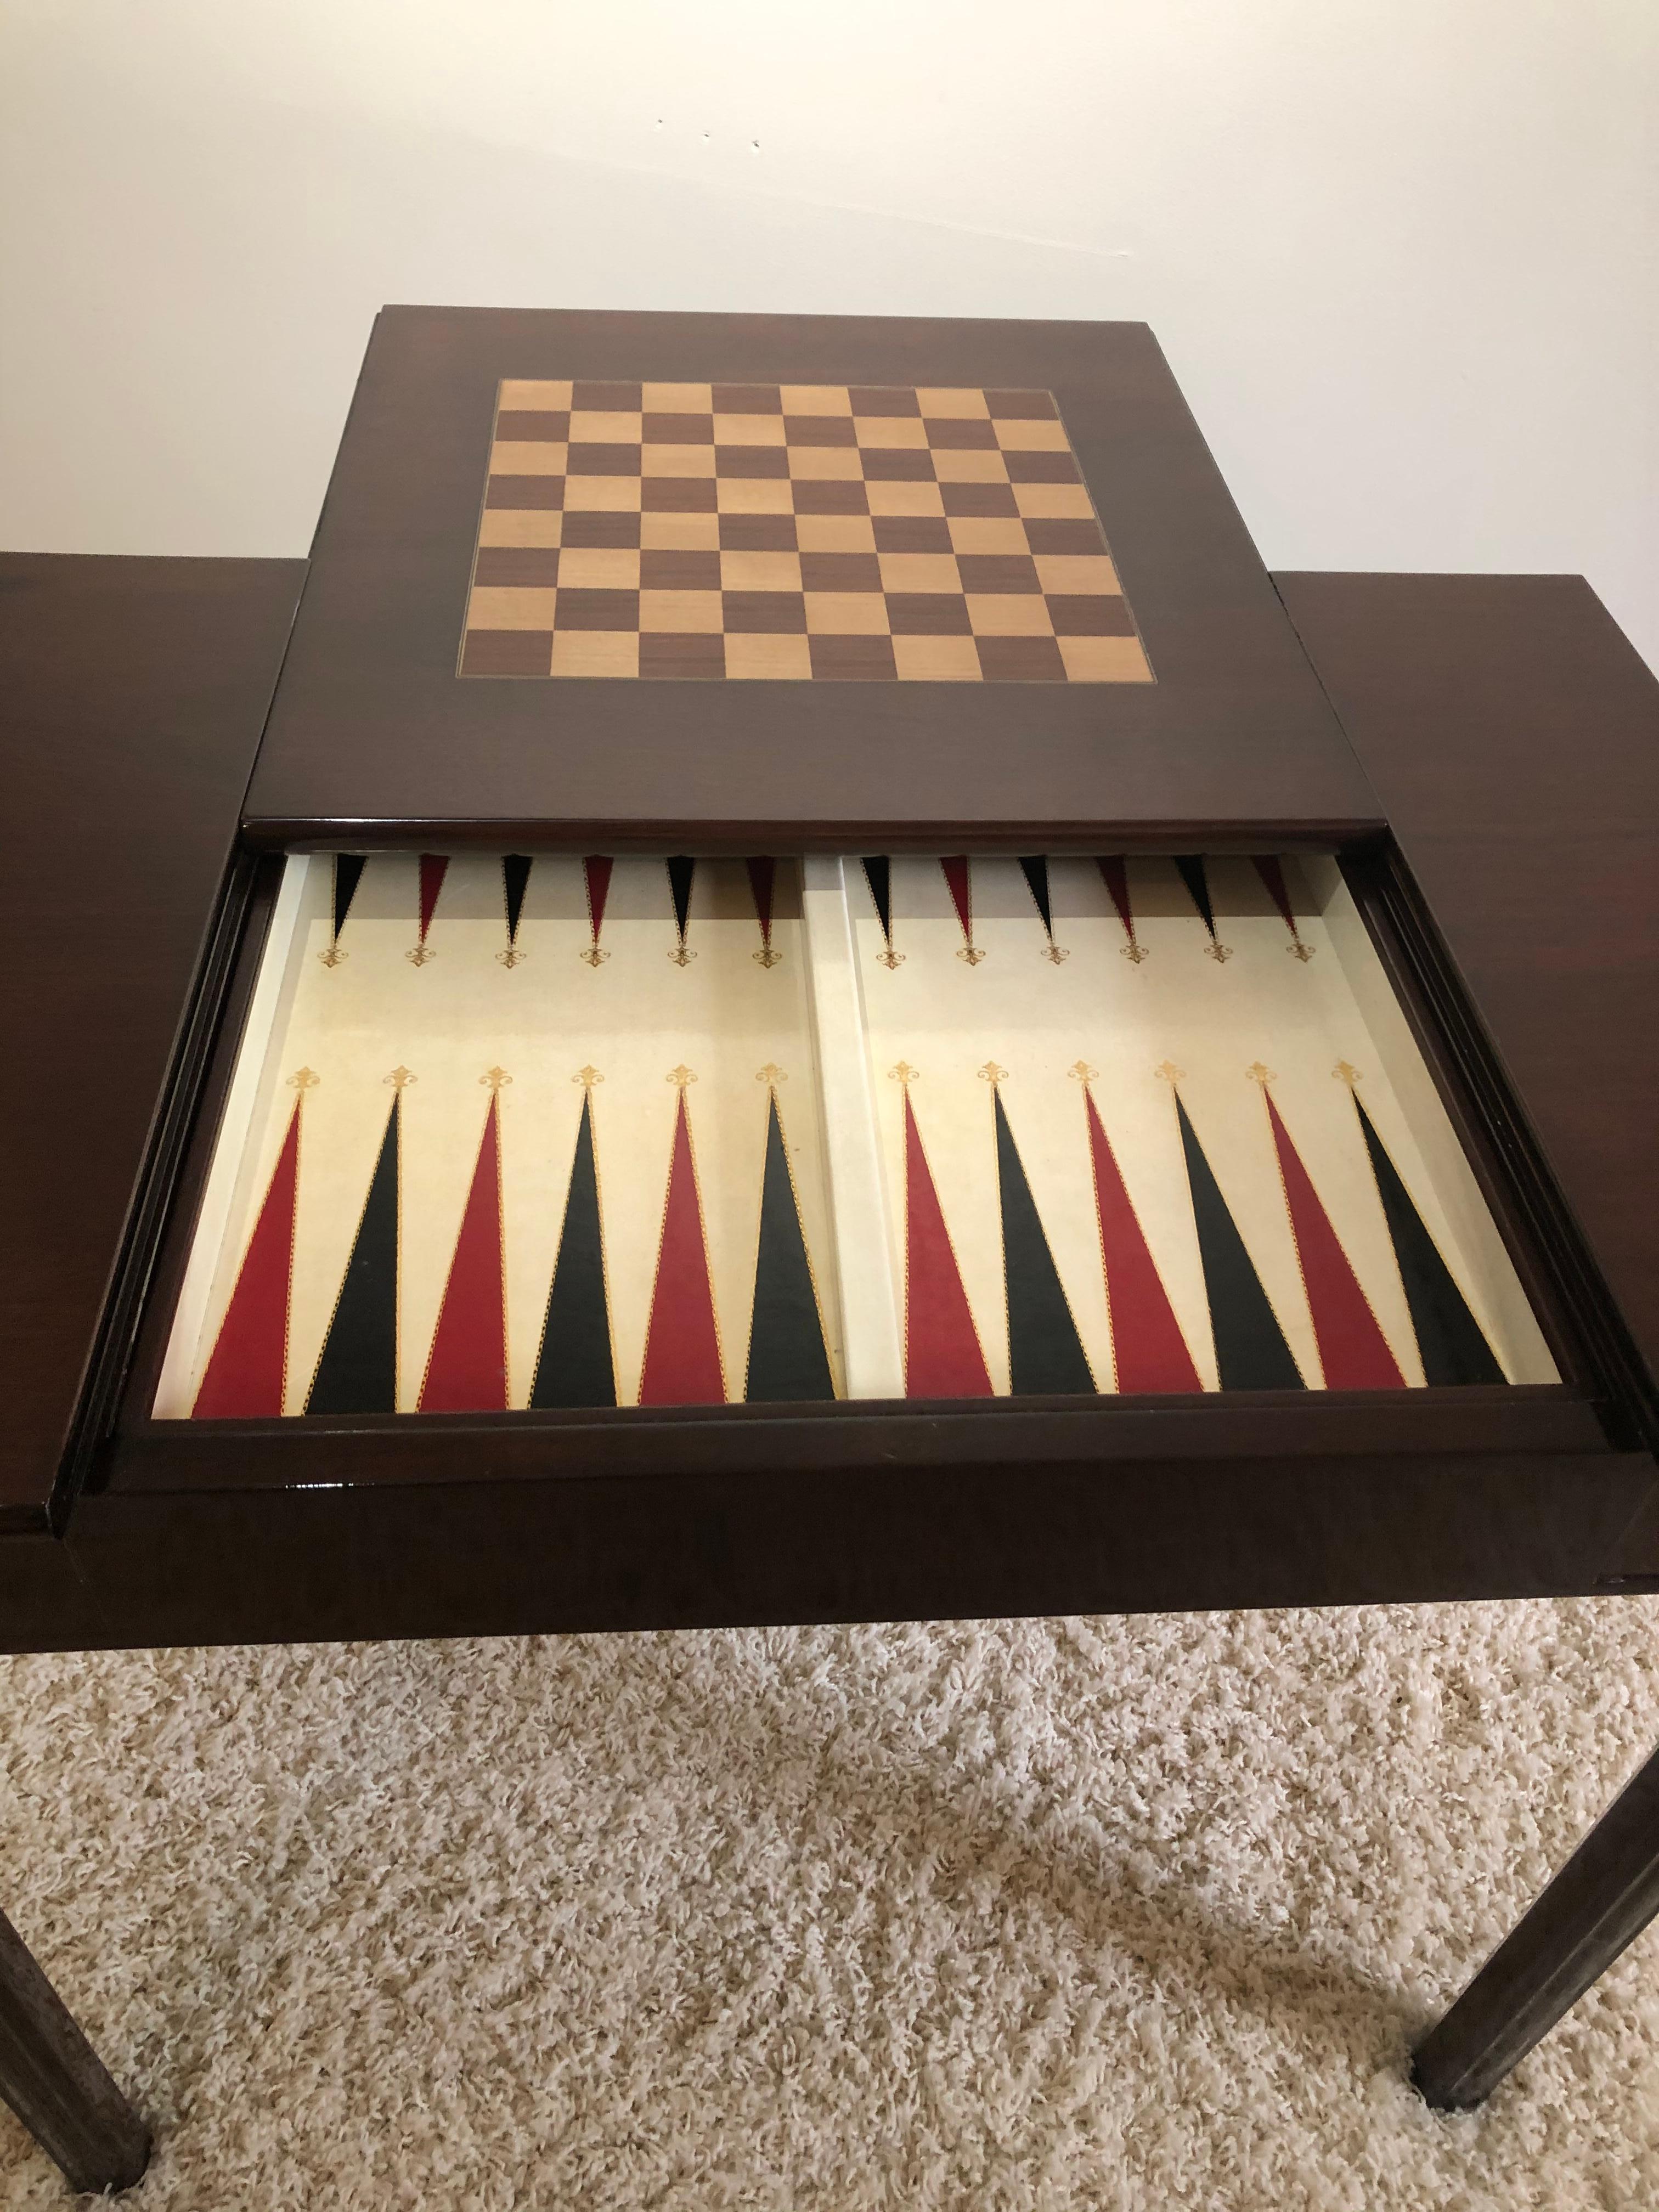 American Backgammon Chess /Checkerboard Top Flip Top Game Table